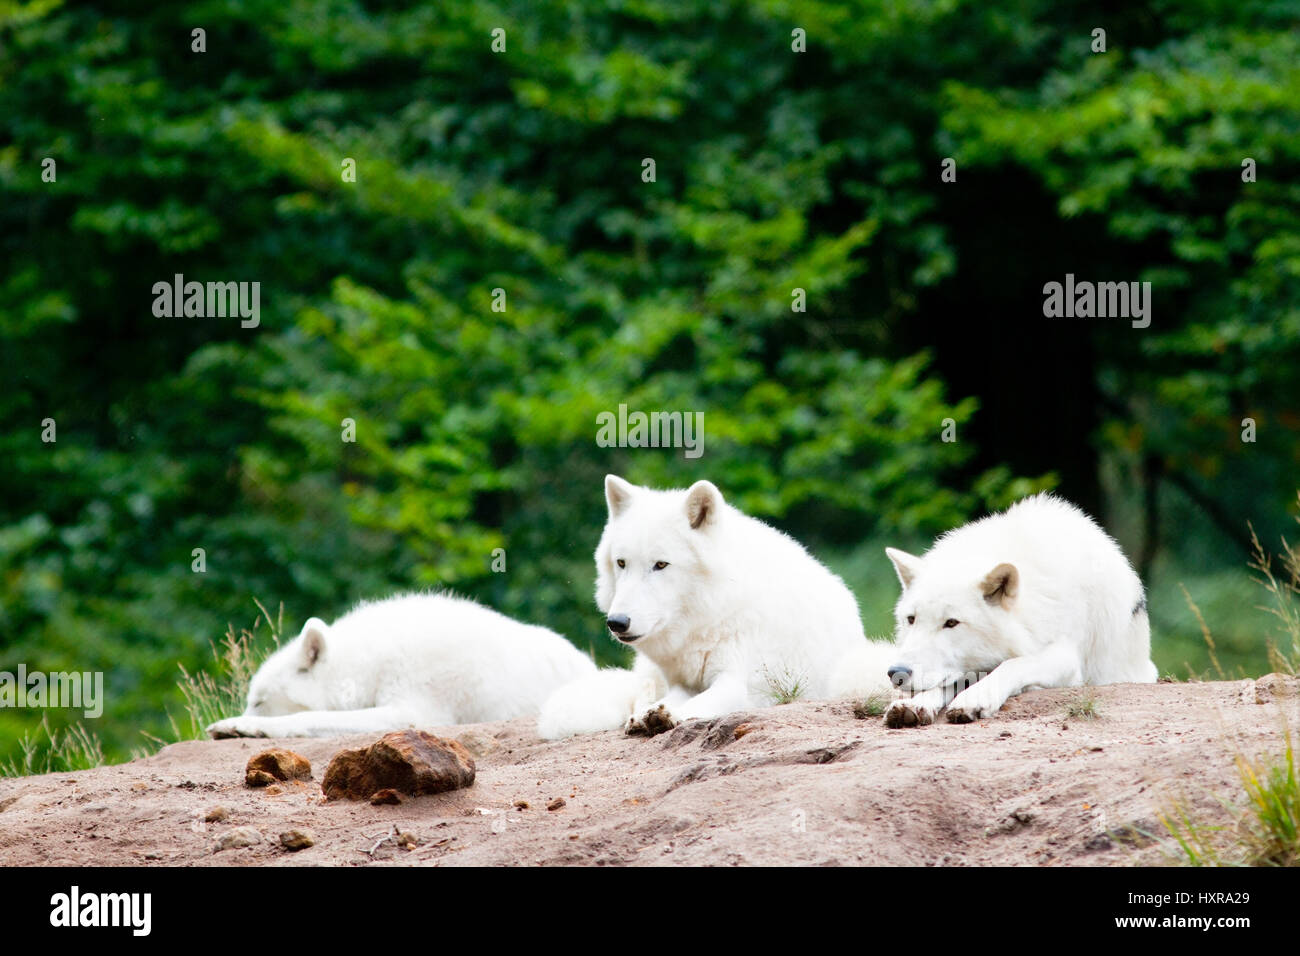 Tundra wolves, Canis lupus albus, by publication brag: Game park old Fasanerie Klein-Auheim, Tundrawölfe,Canis lupus albus, bei Veröffentlichung angeb Stock Photo